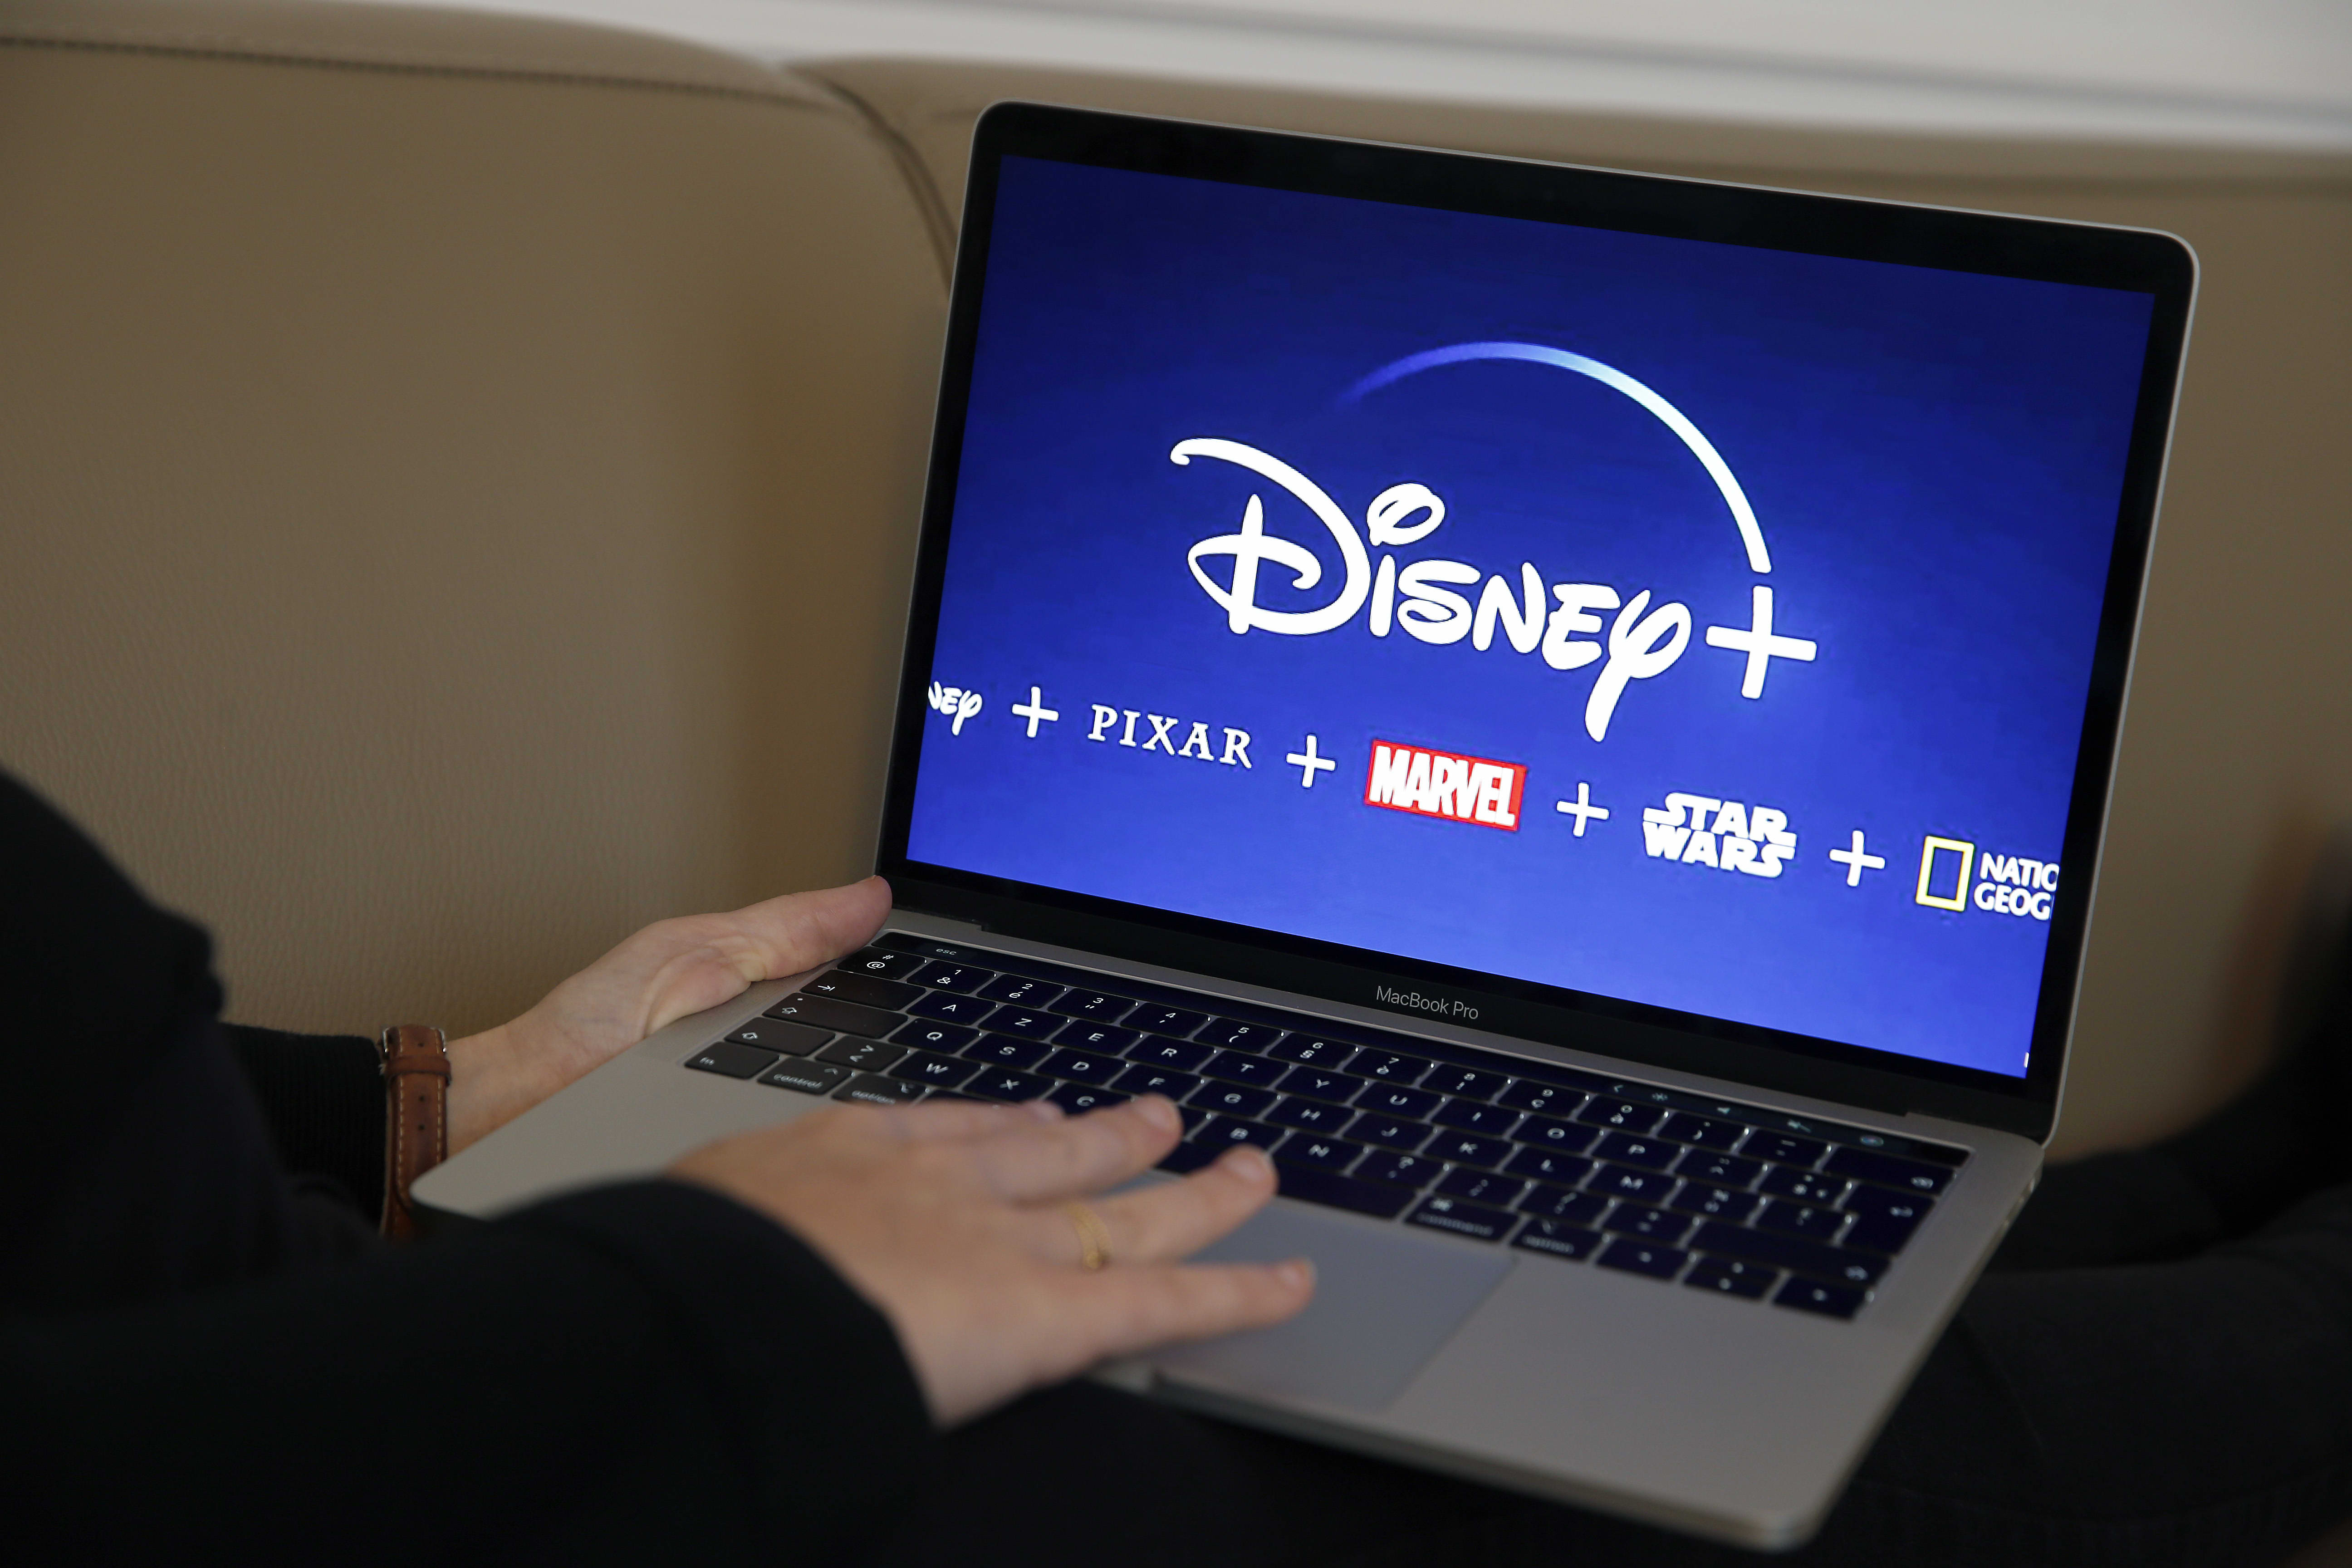 Hacked Disney+ accounts are reportedly being sold for as little as $3